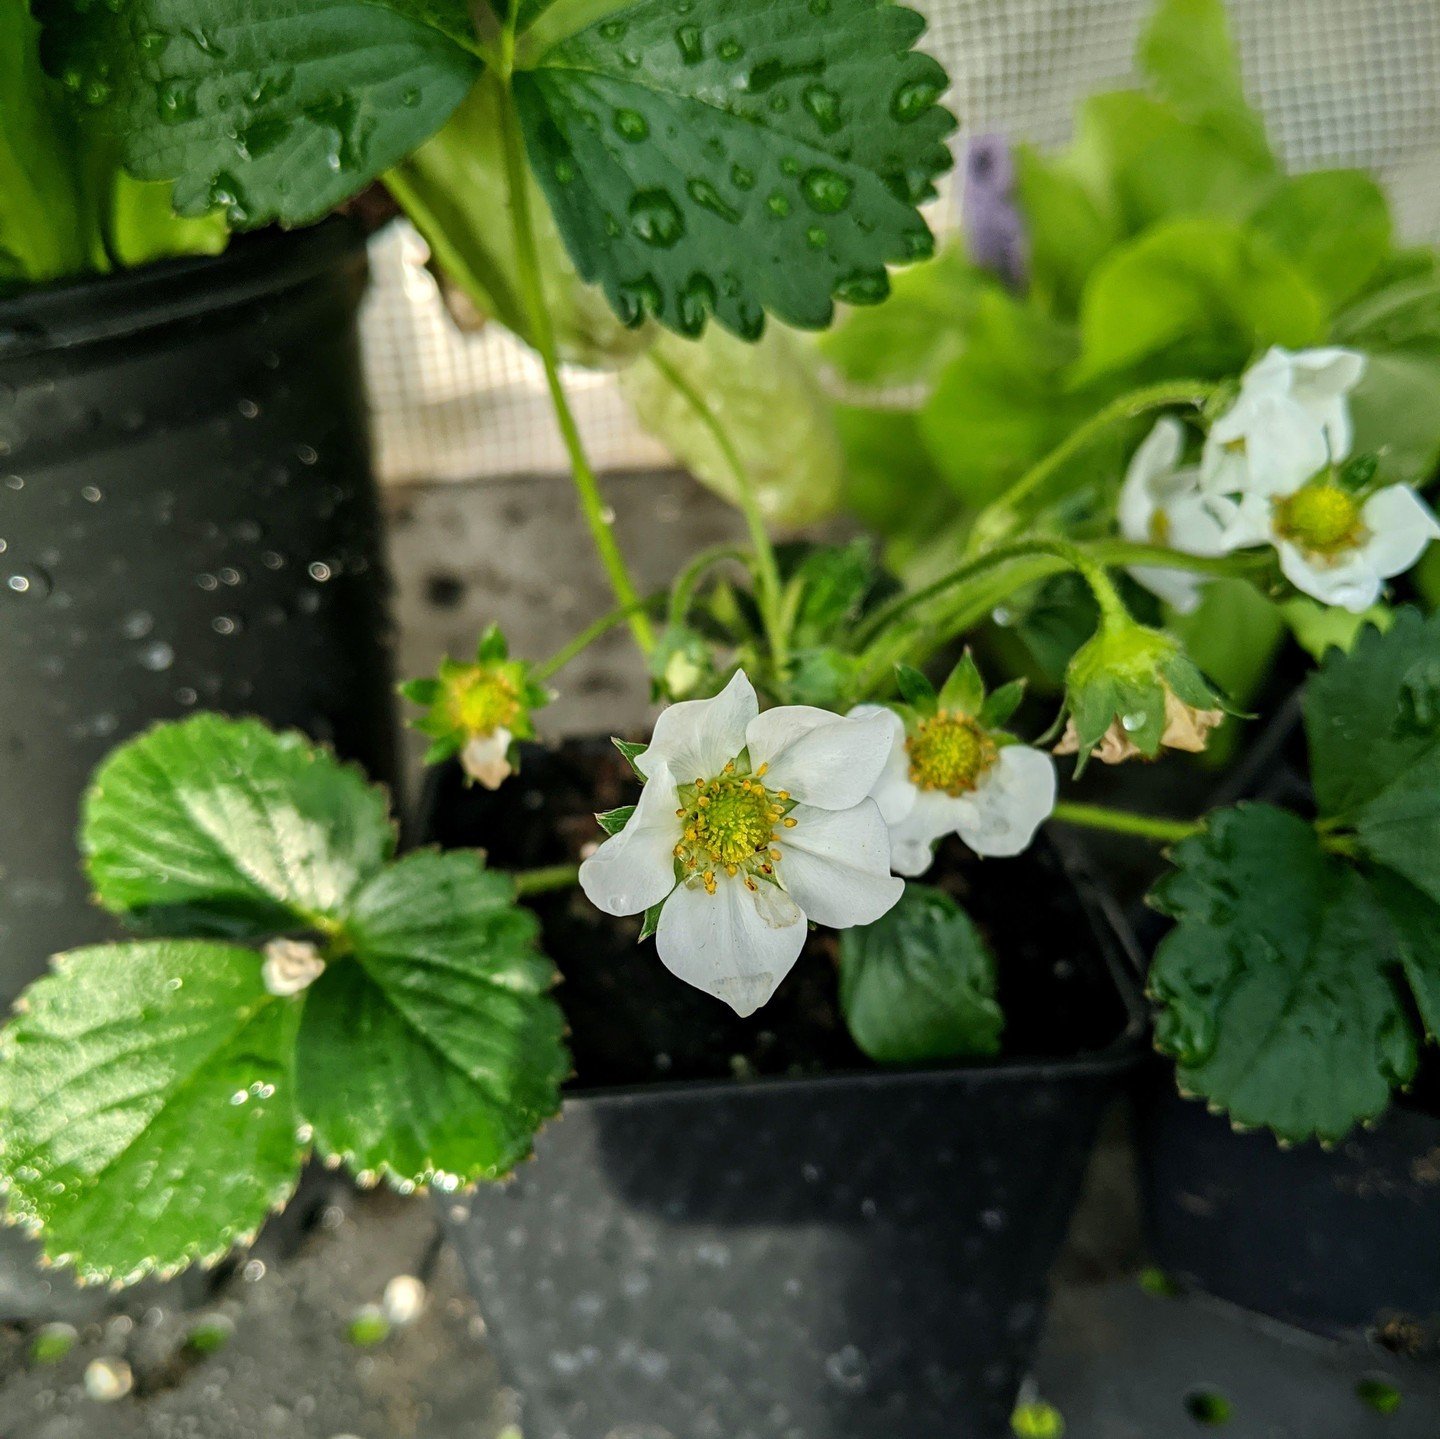 Almost Ready for the Big Move! 

Once the weather warms up, these strawberry seedlings will be transplanted from the greenhouse to the garden. 🌼 Excited to watch them grow and flourish! Who else is planting strawberries this season? 🙌 

#Strawberry